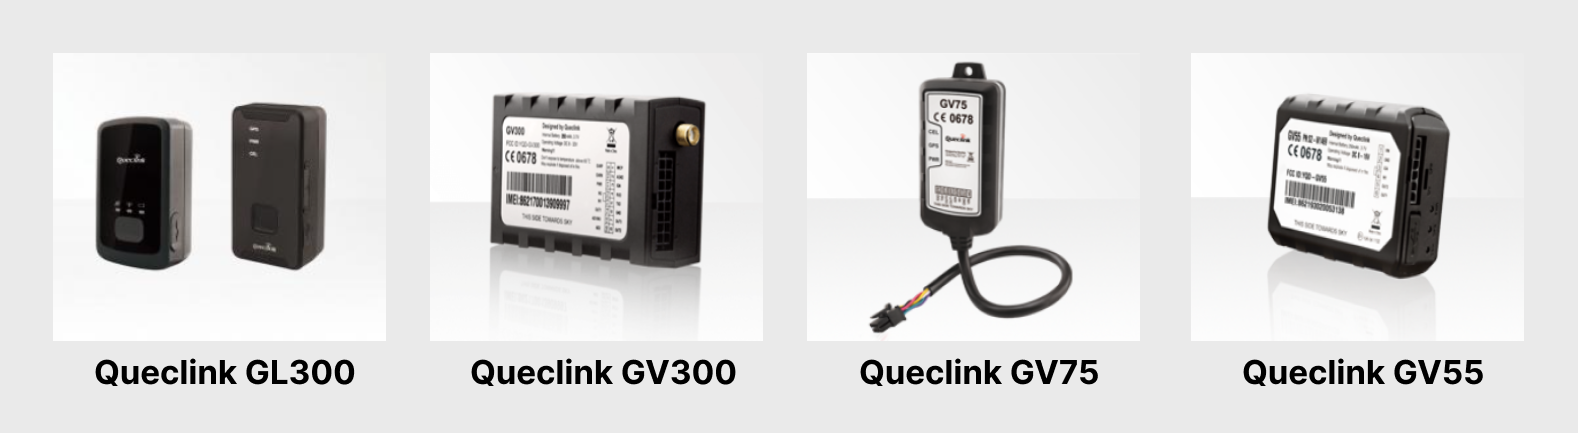 Queclink gps devices